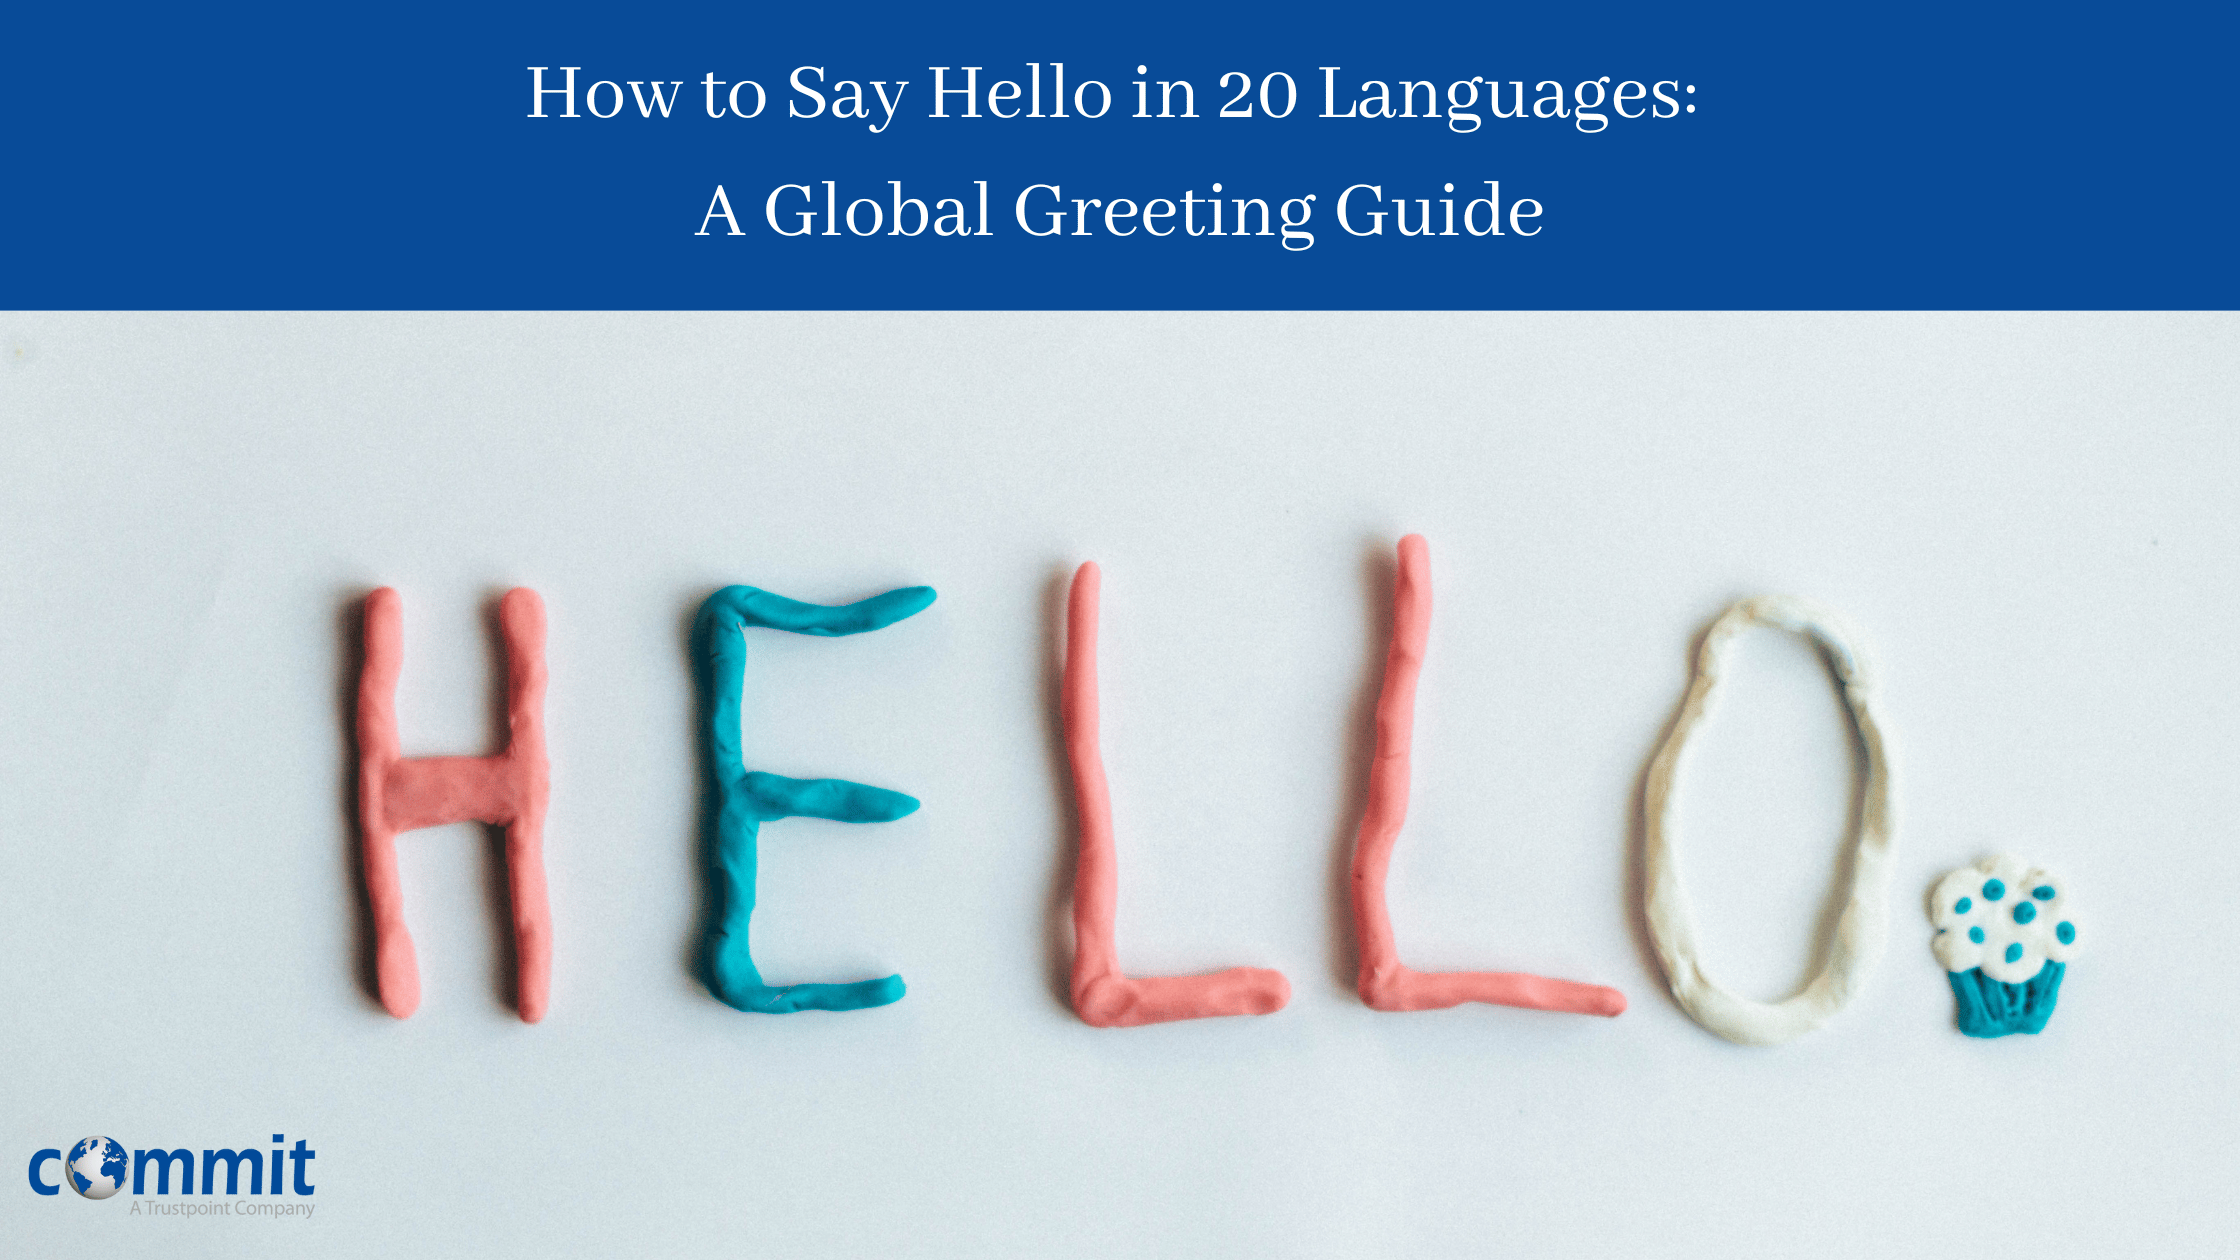 C:\Users\effies\Downloads\How to Say Hello in 20 Languages A Global Greeting Guide